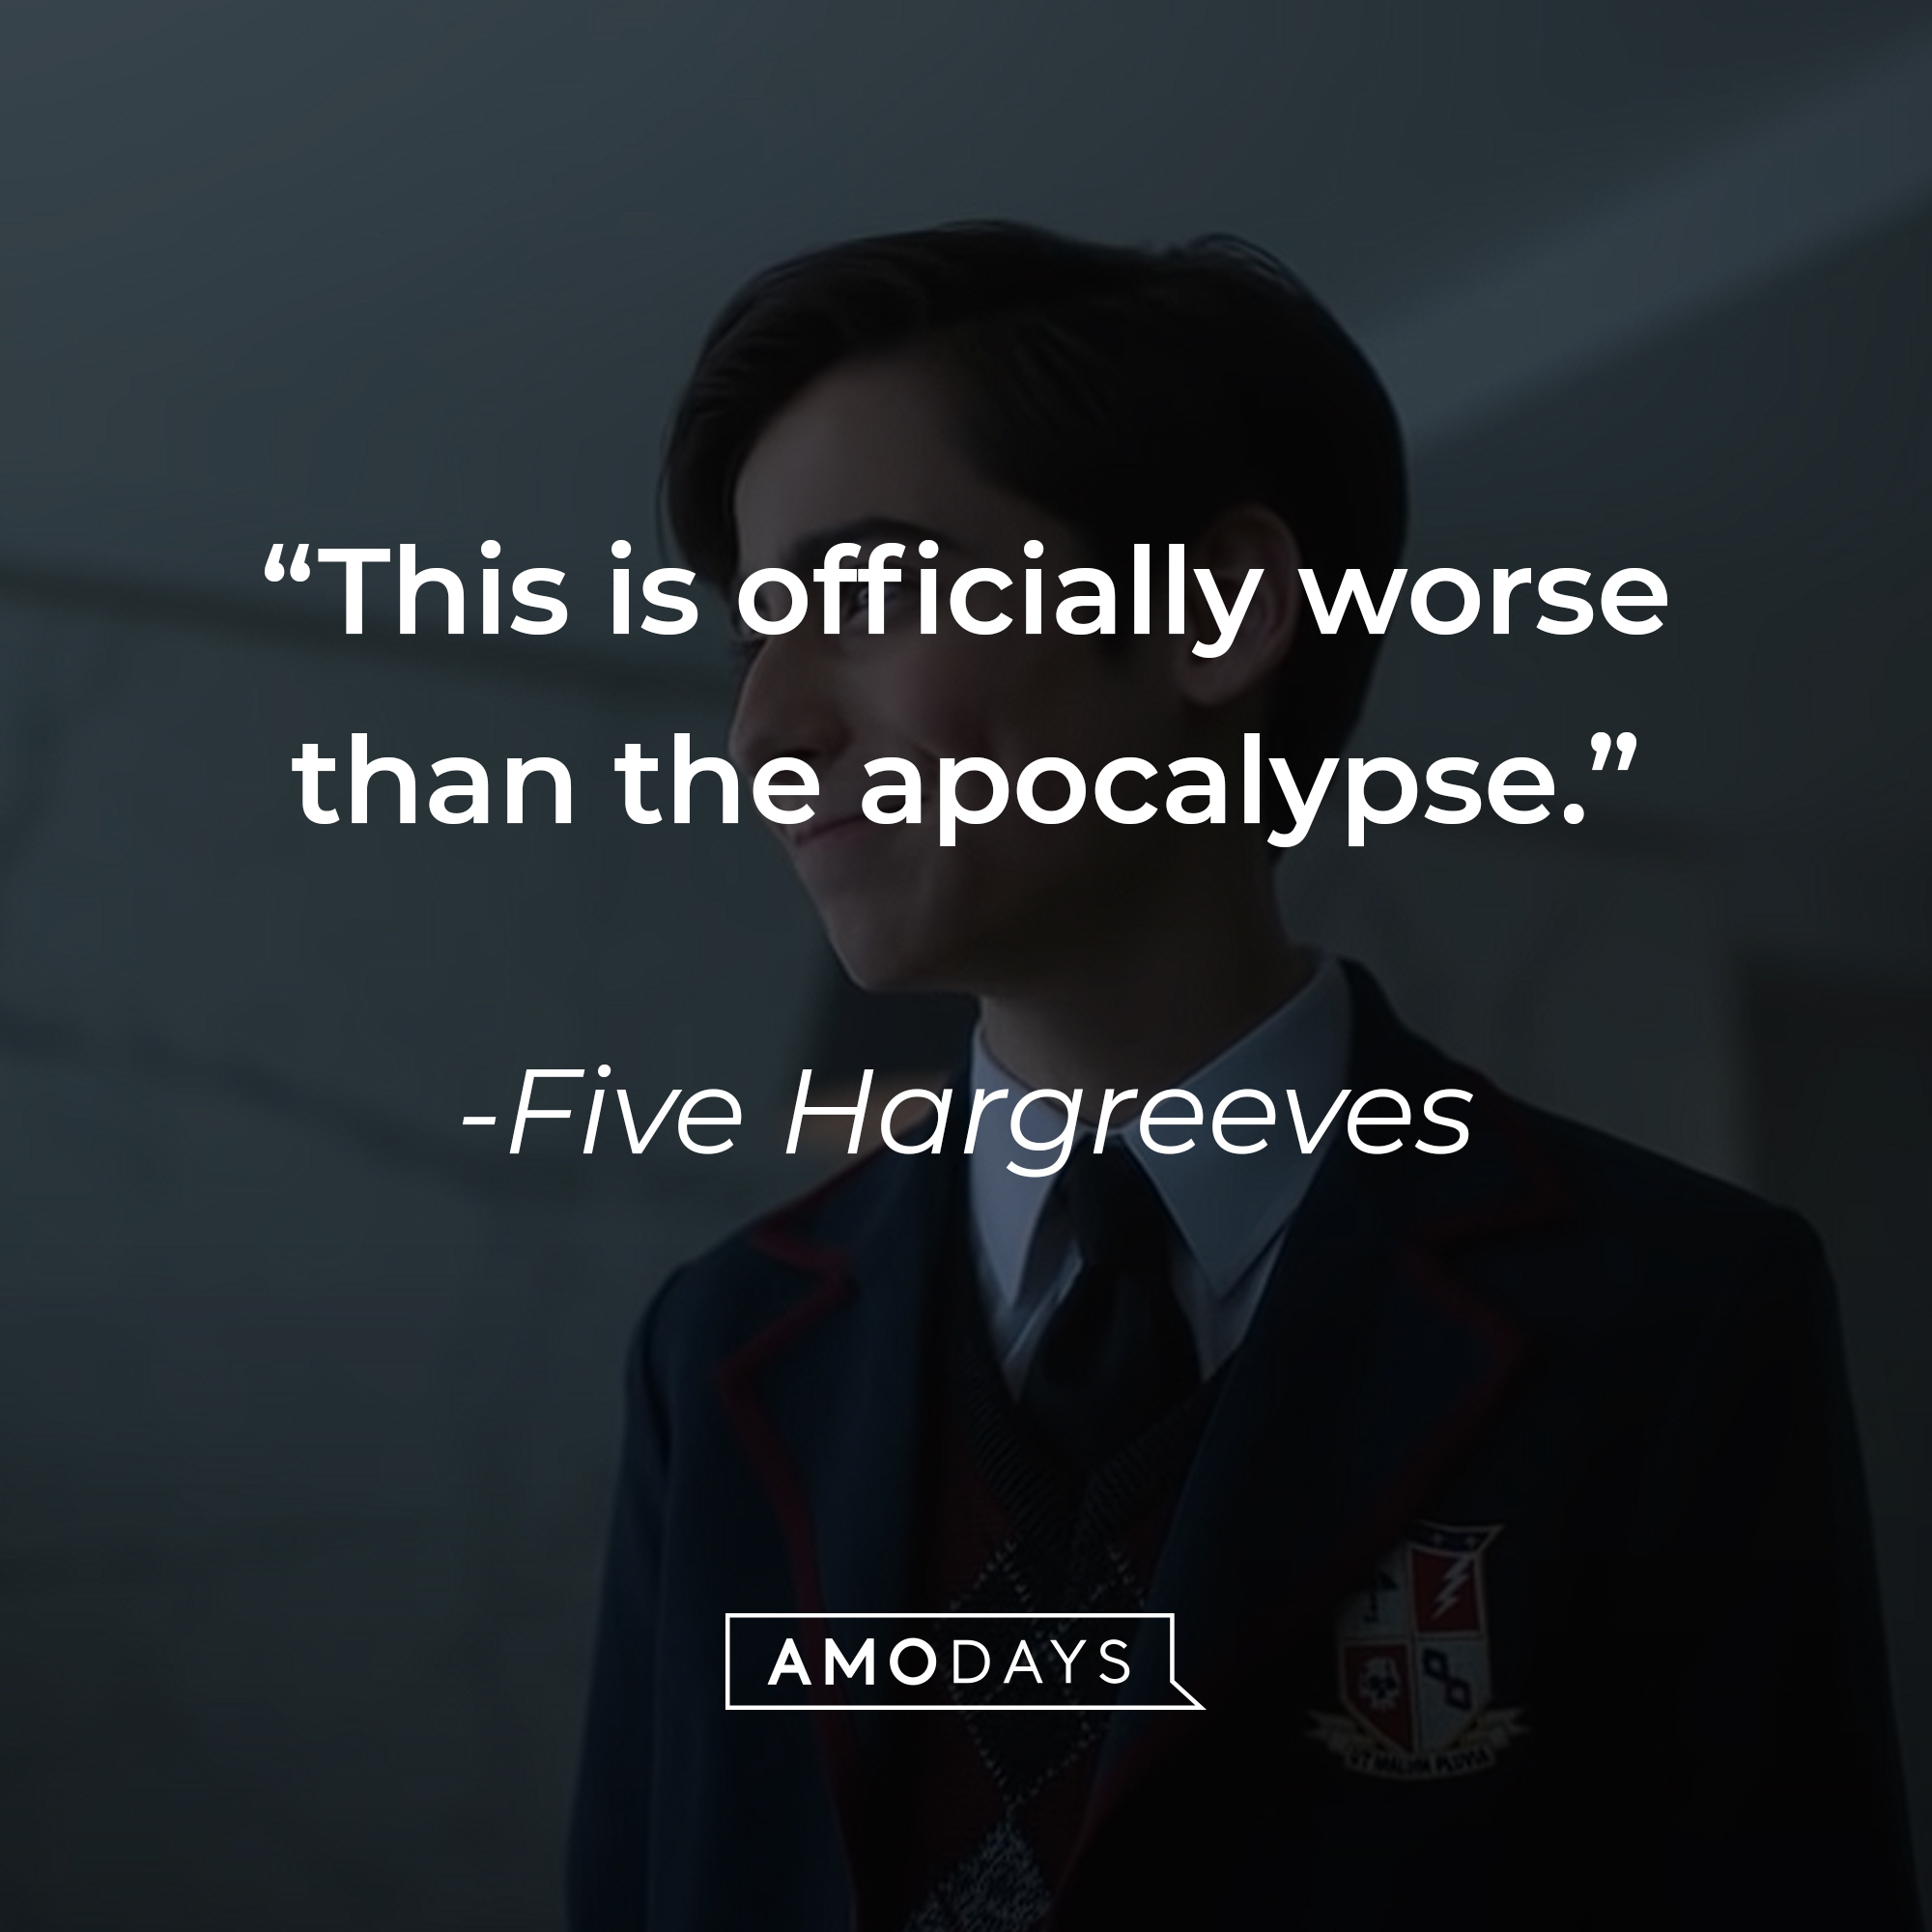 Five Hargreeves’ quote: “This is officially worse than the apocalypse.” | Source: youtube.com/Netflix